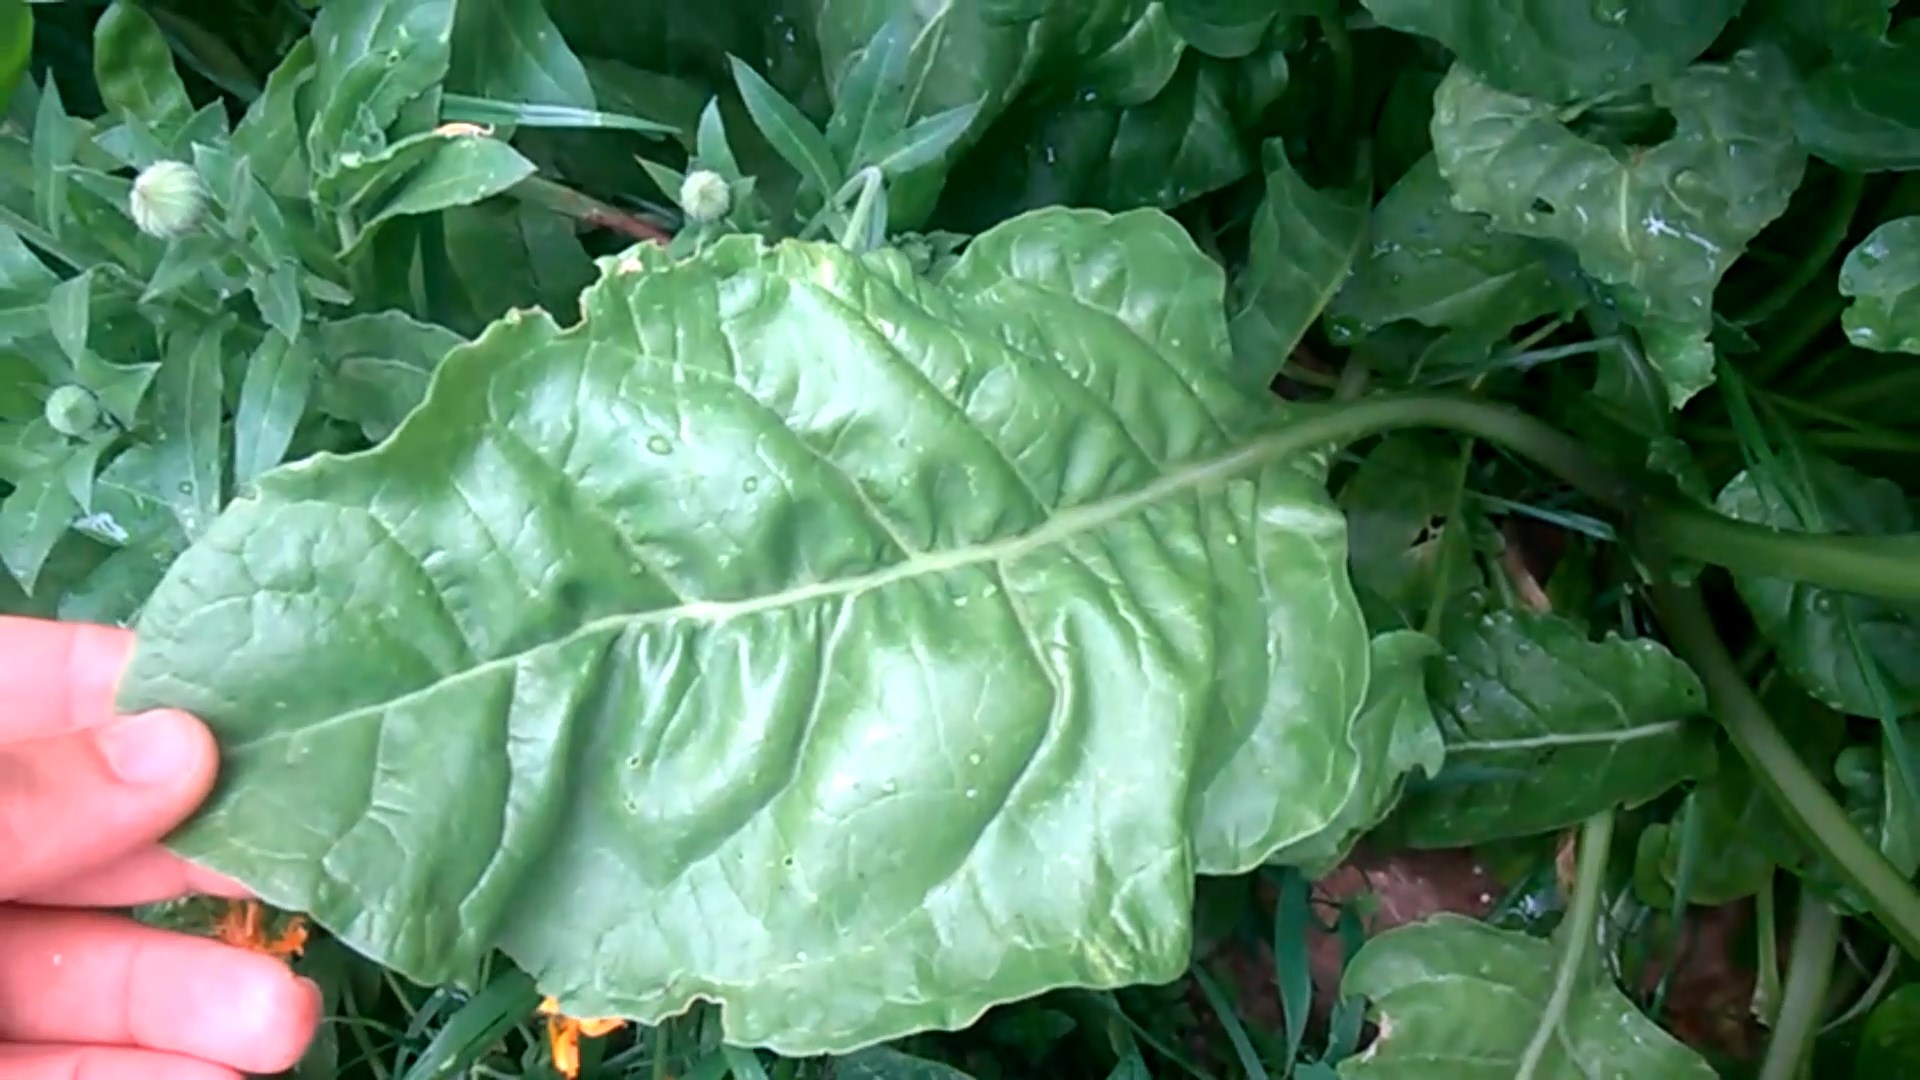 Start snipping and eating chard anytime after leaves form. To harvest mature chard, cut full-size leaves from the outside of the plant.